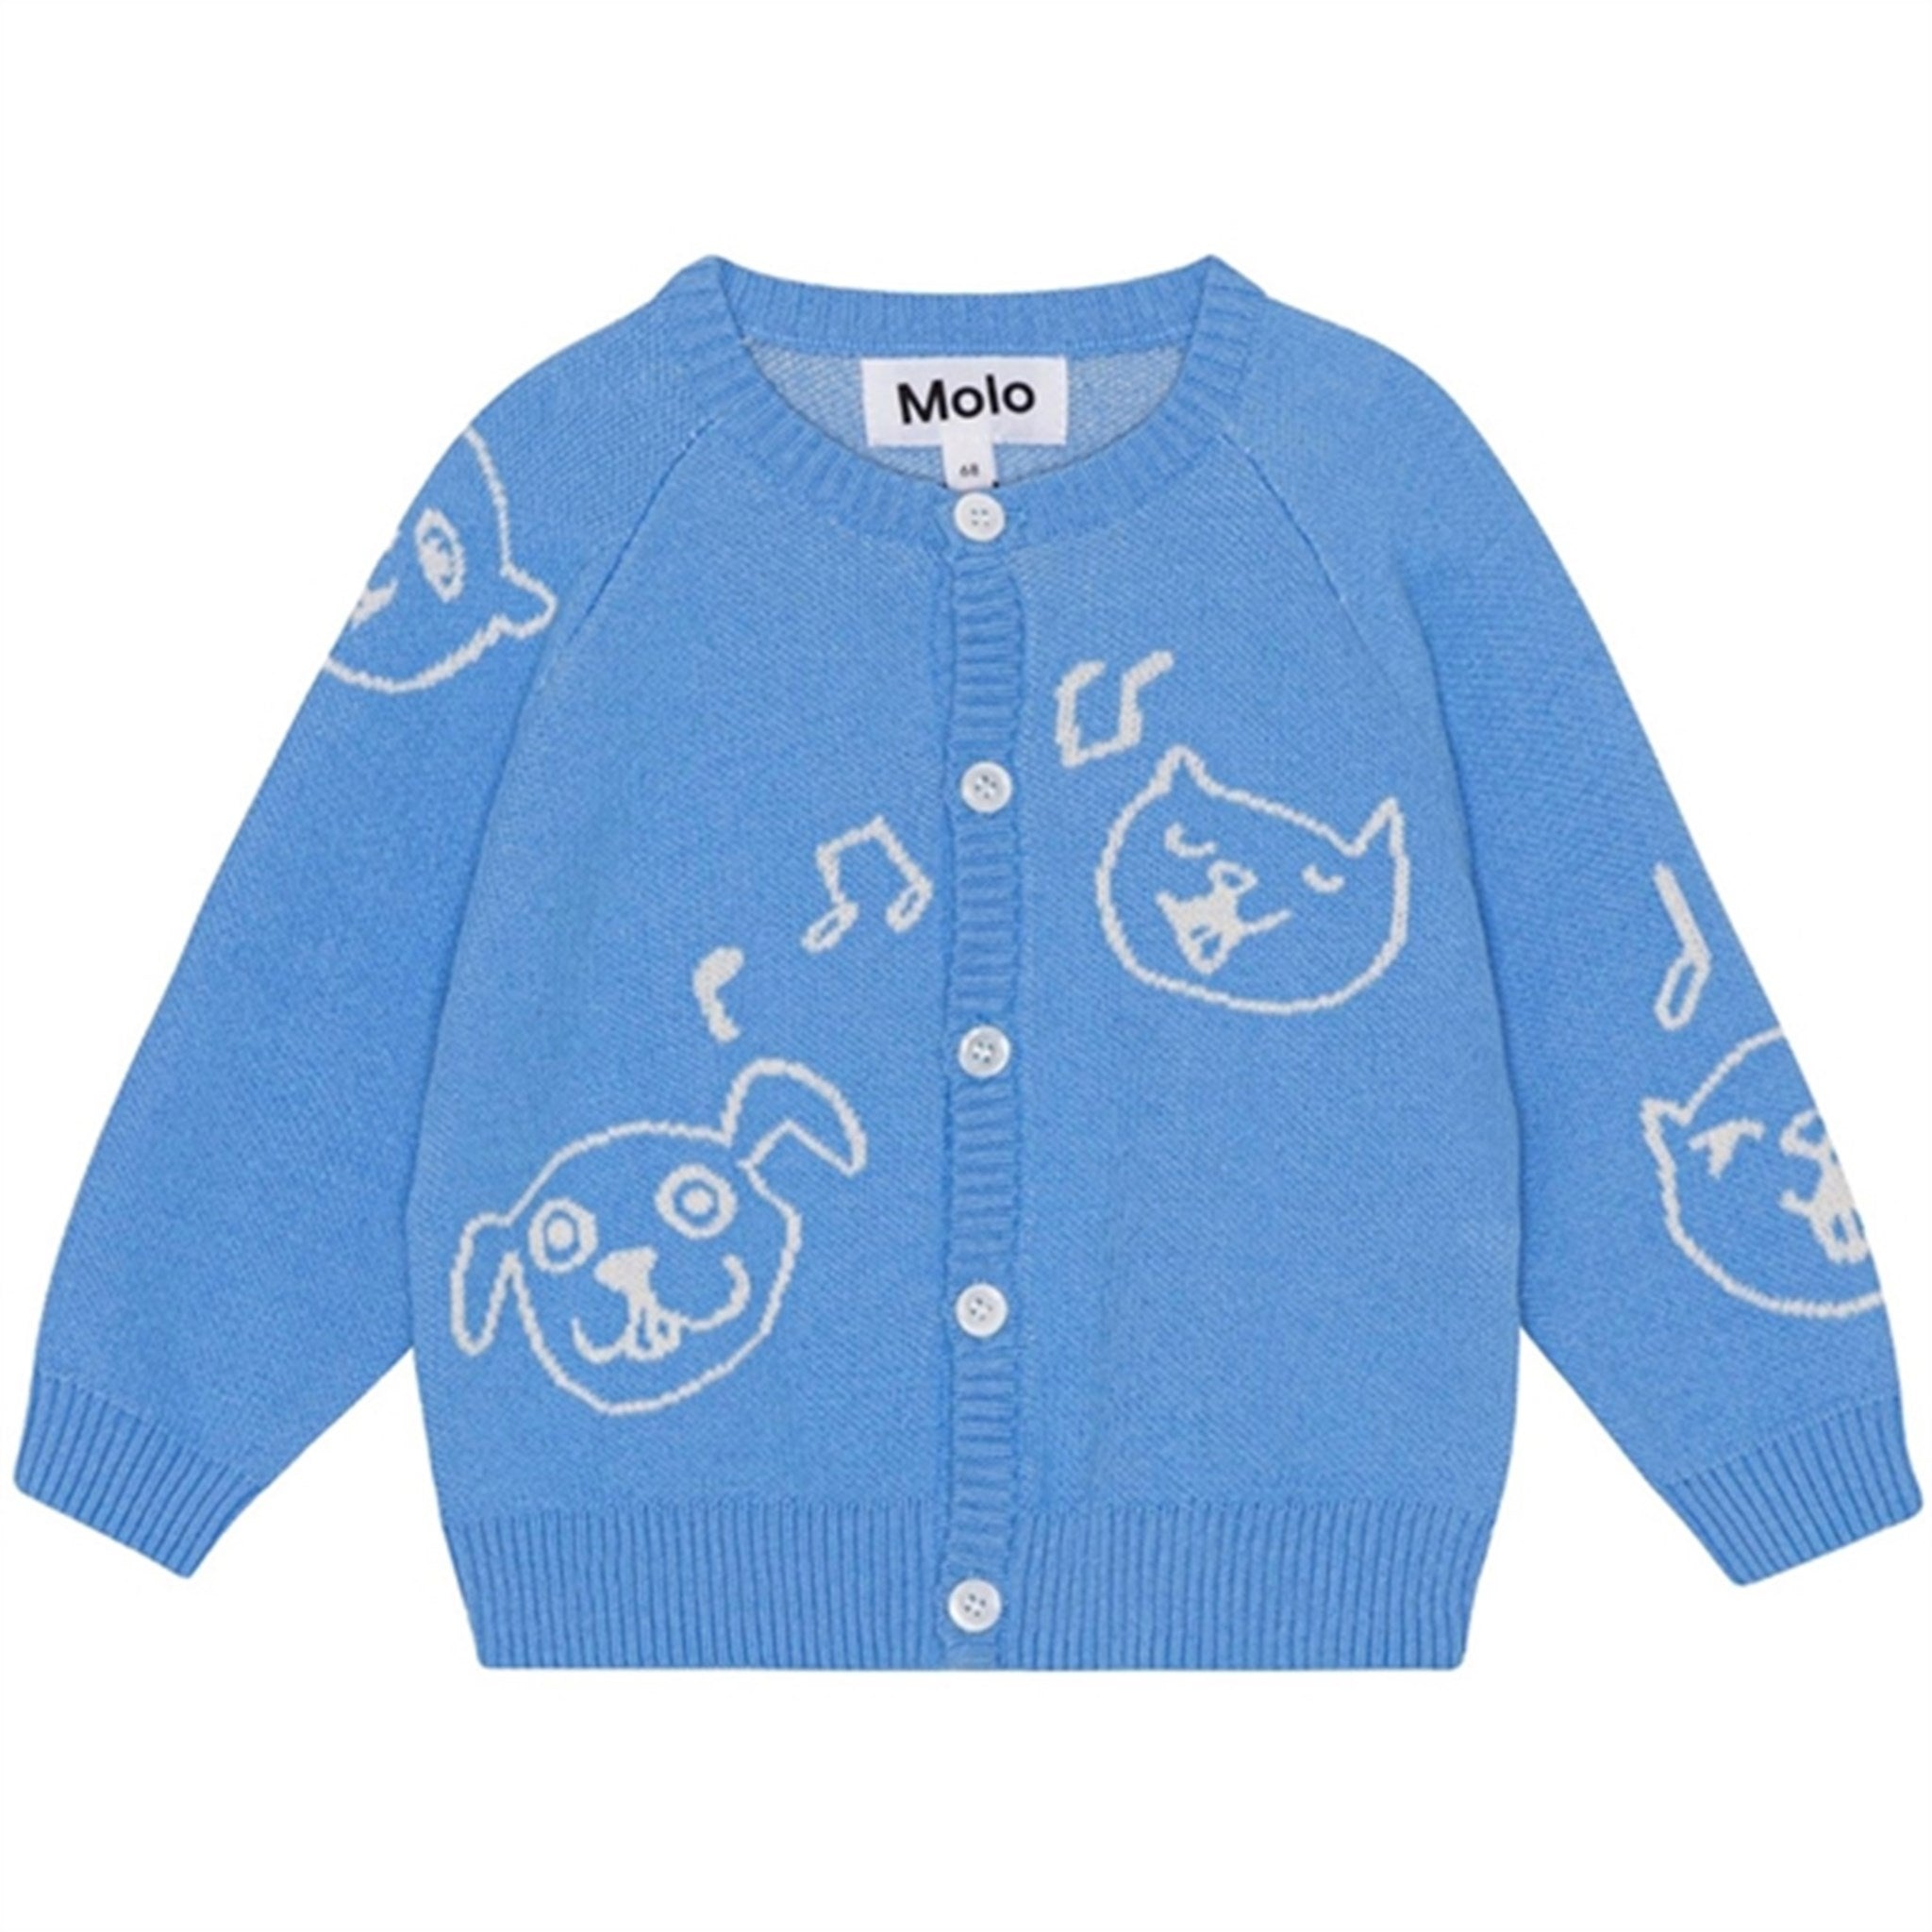 Molo Forget Me Not Brody Cardigan